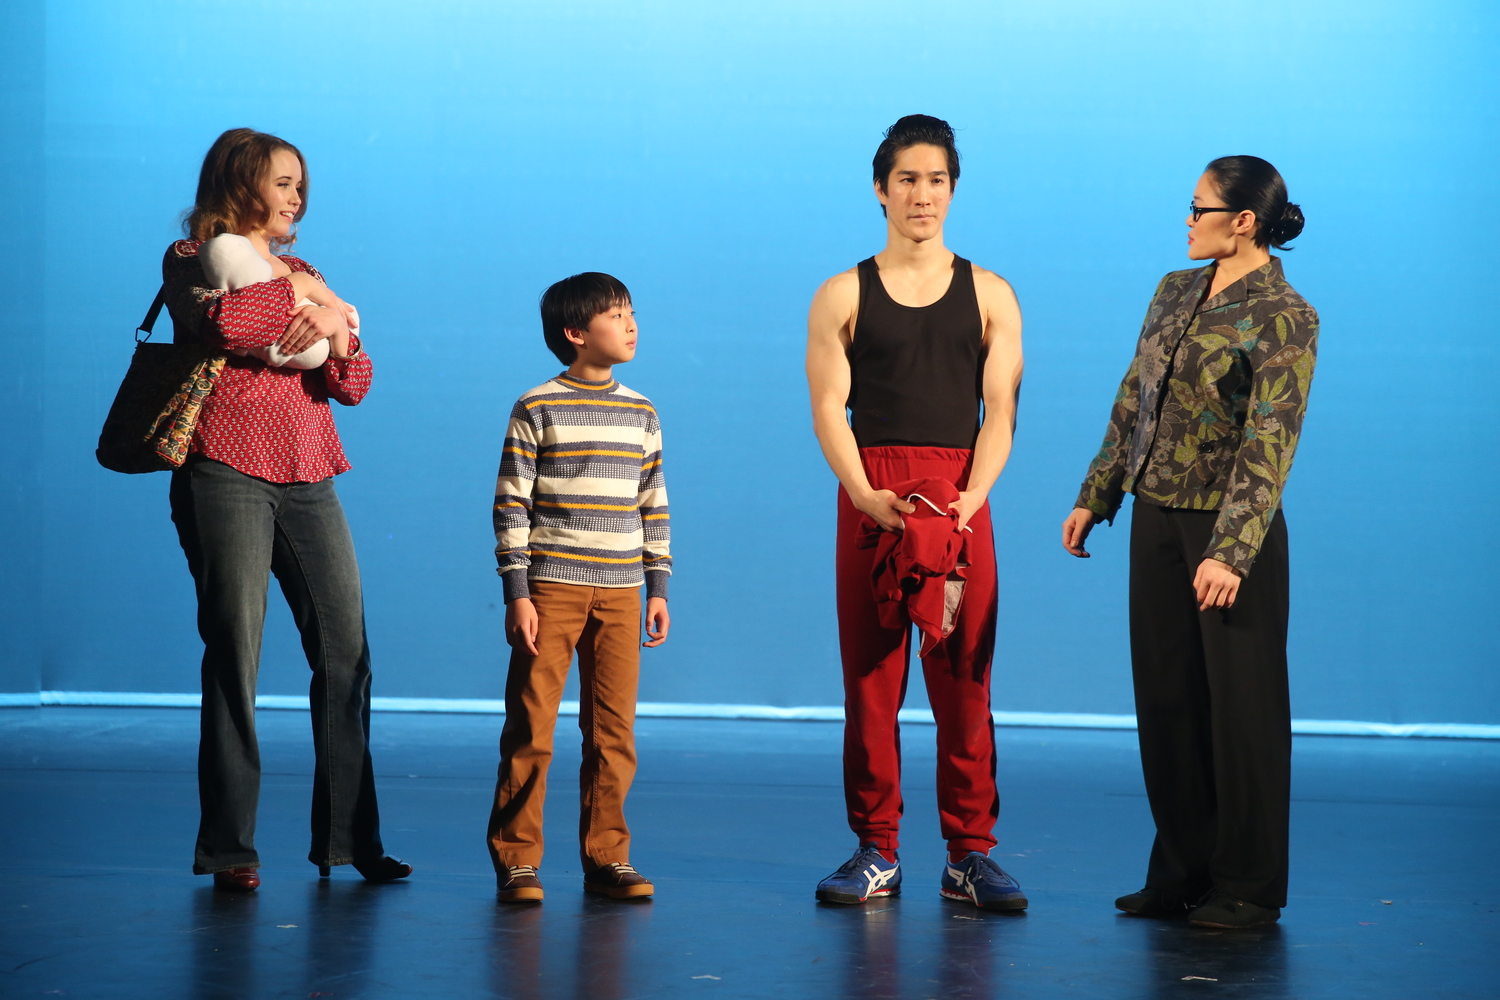 Phoebe Strole, Bradley Fong, Cole Horibe, and Kristin Faith Oei. Photo by Joan Marcus for Signature Theatre, 2014